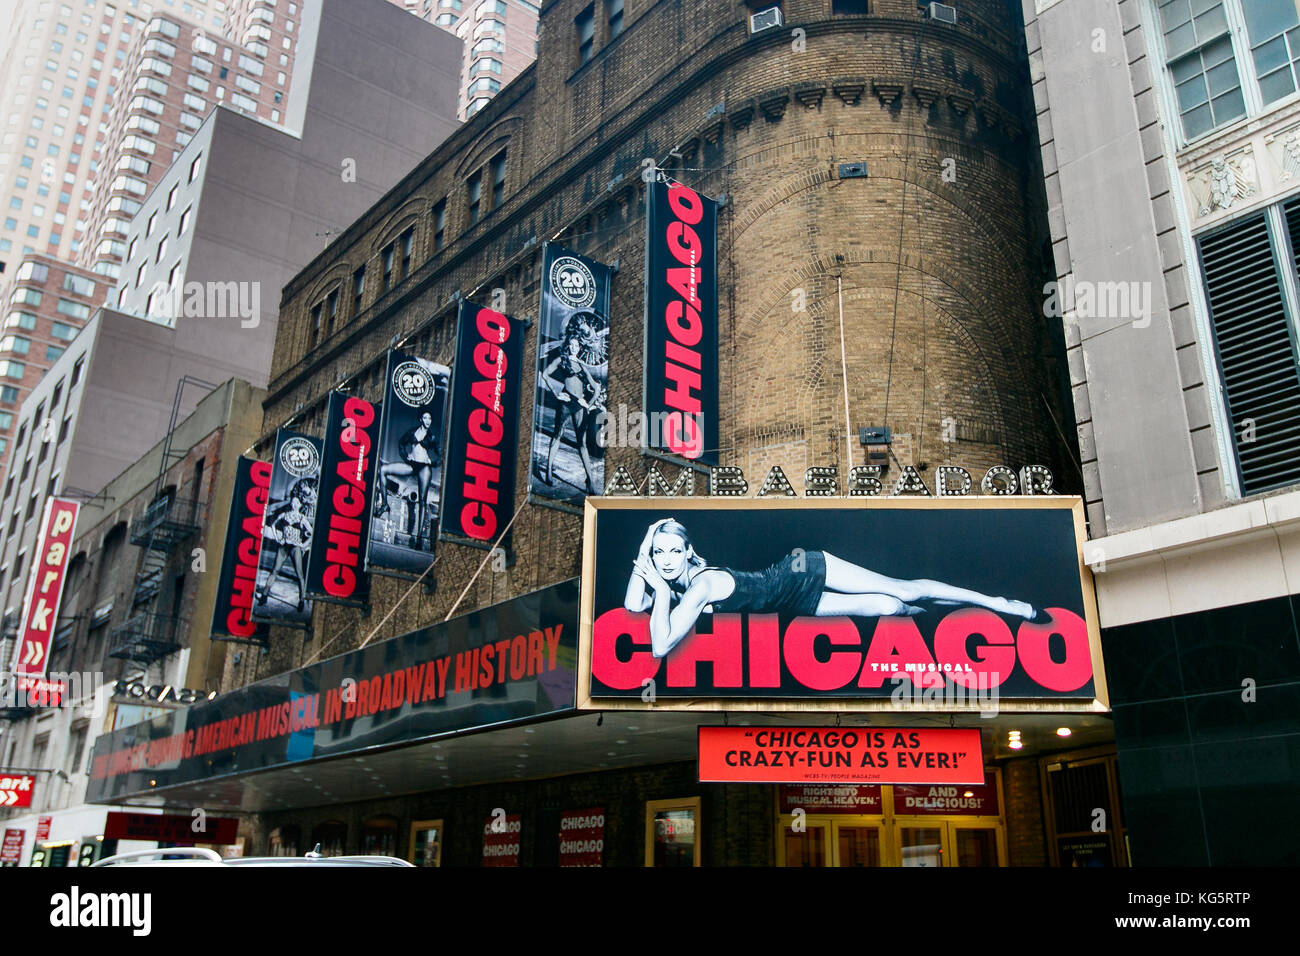 Exterior of the Ambassador theater with advertisement of the Chicago musical. Stock Photo